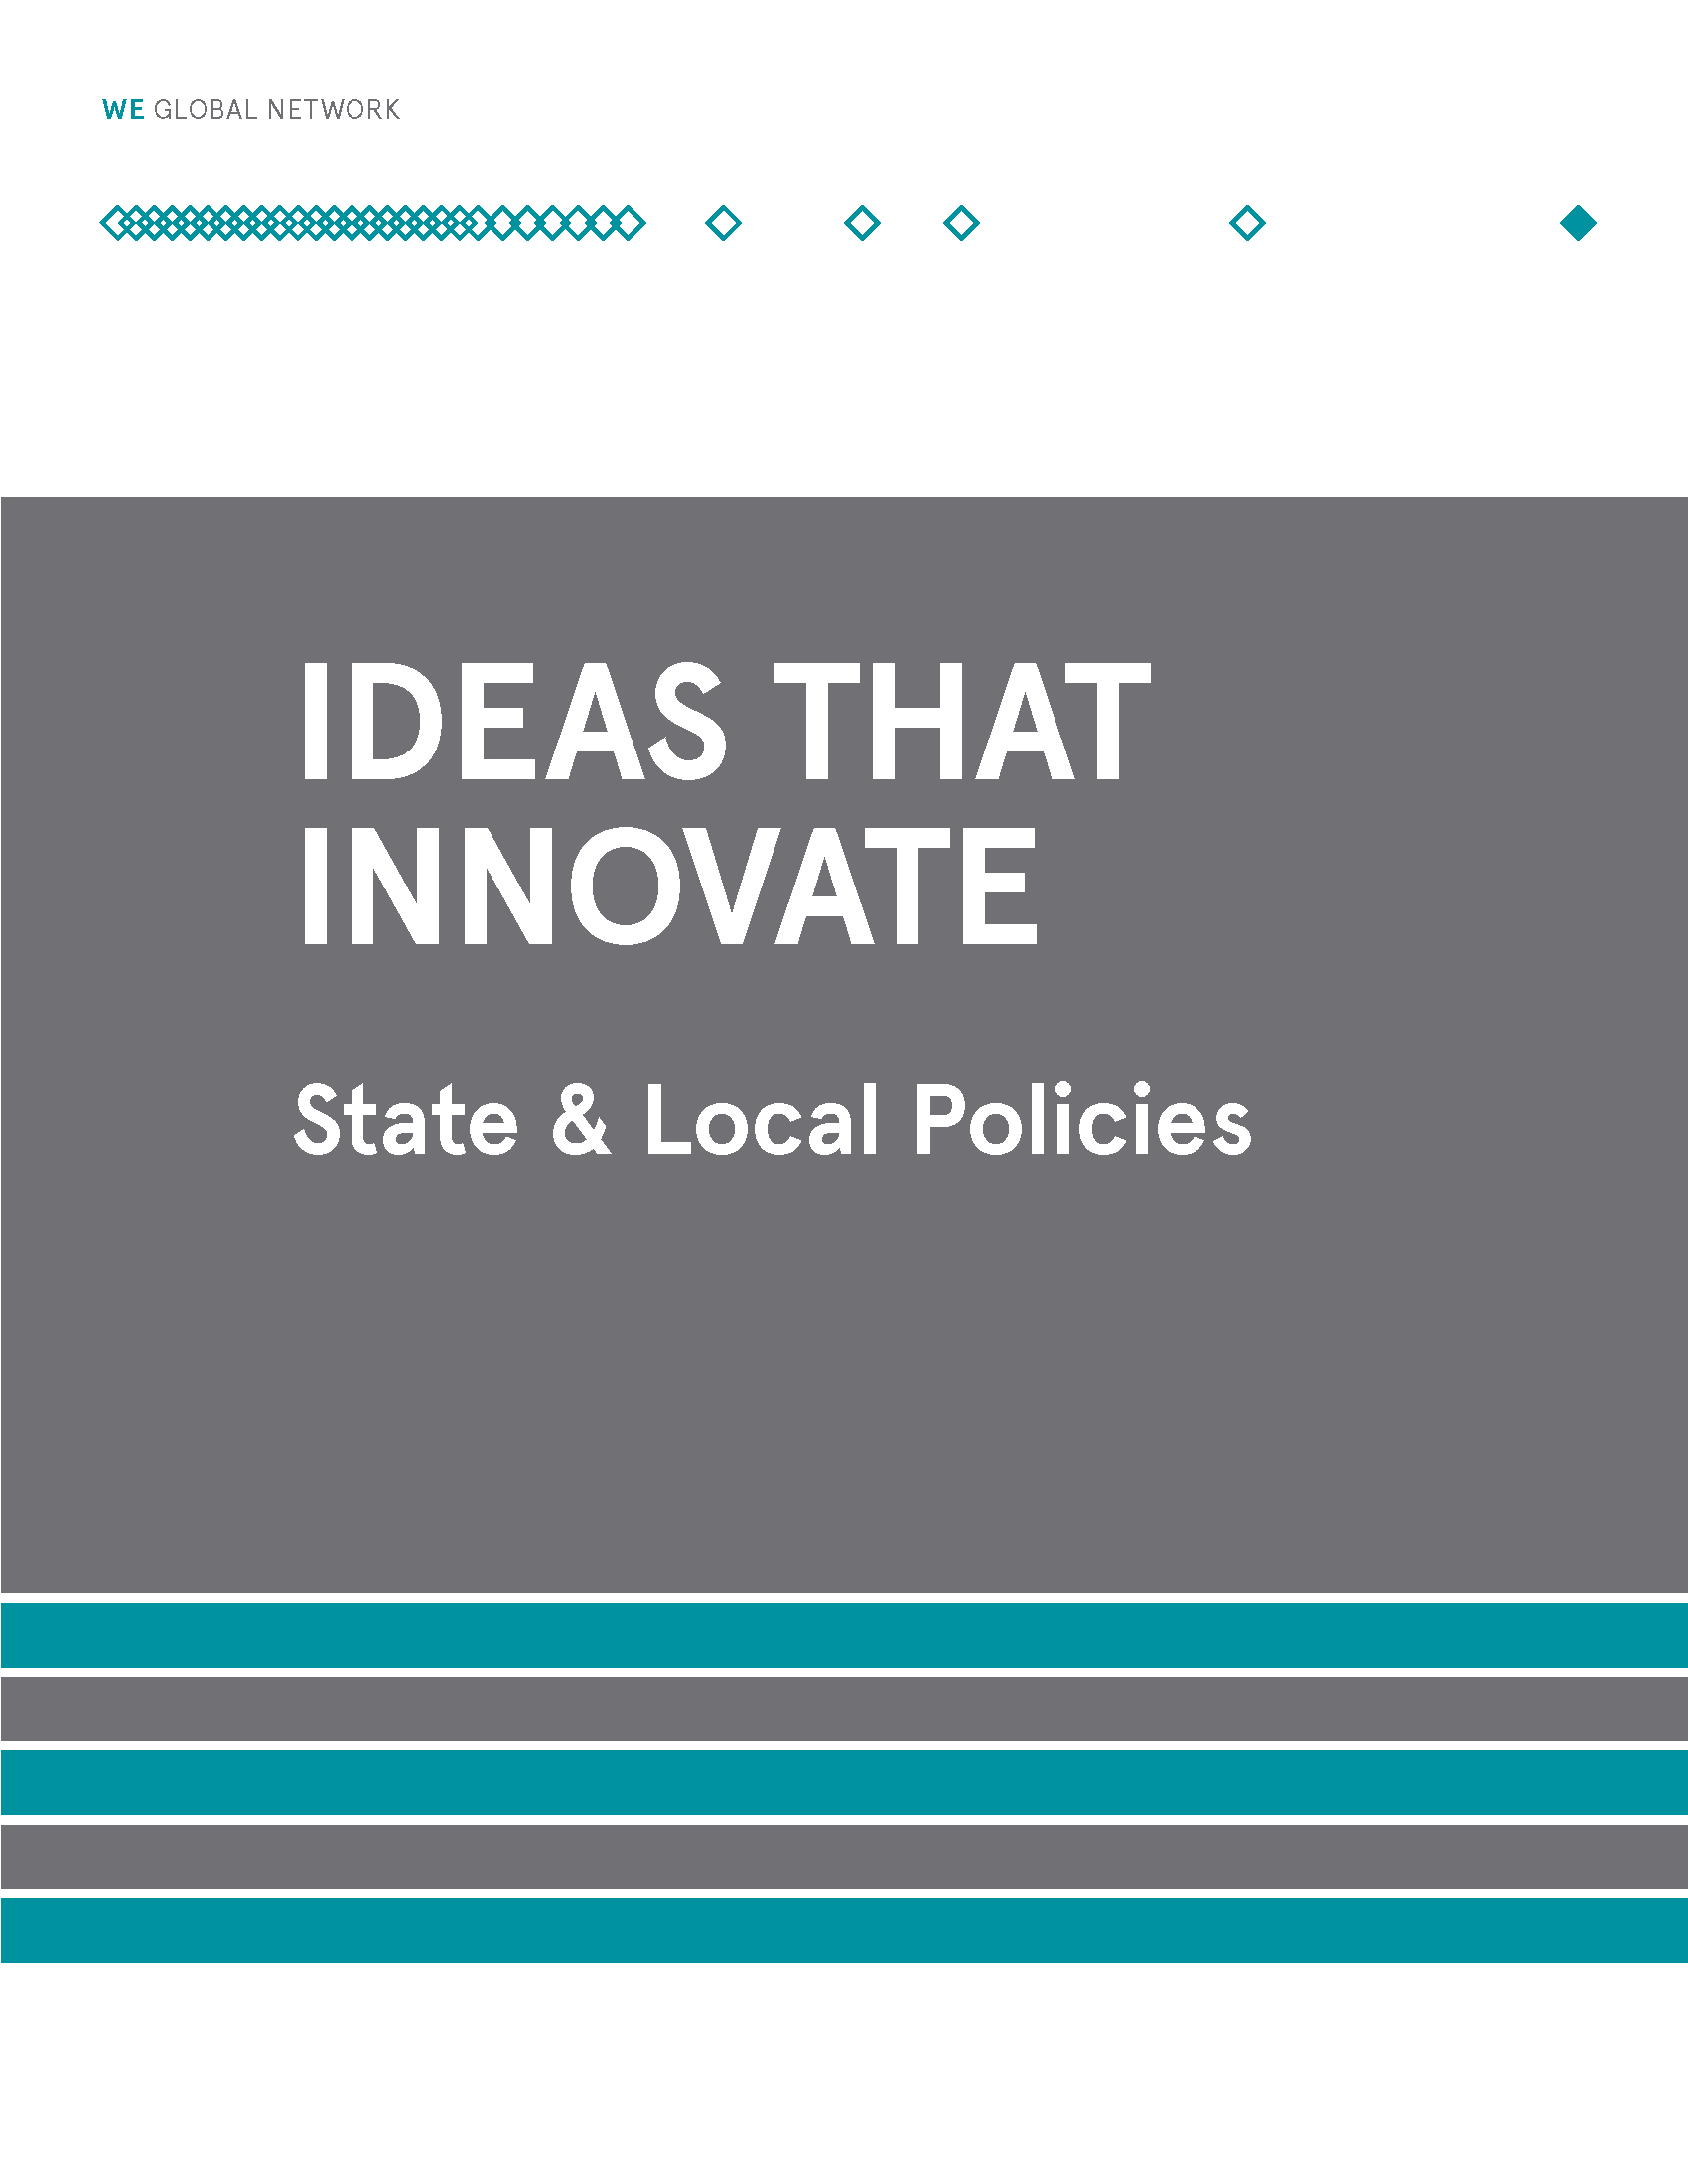 WE Global Ideas That Innovate Cover